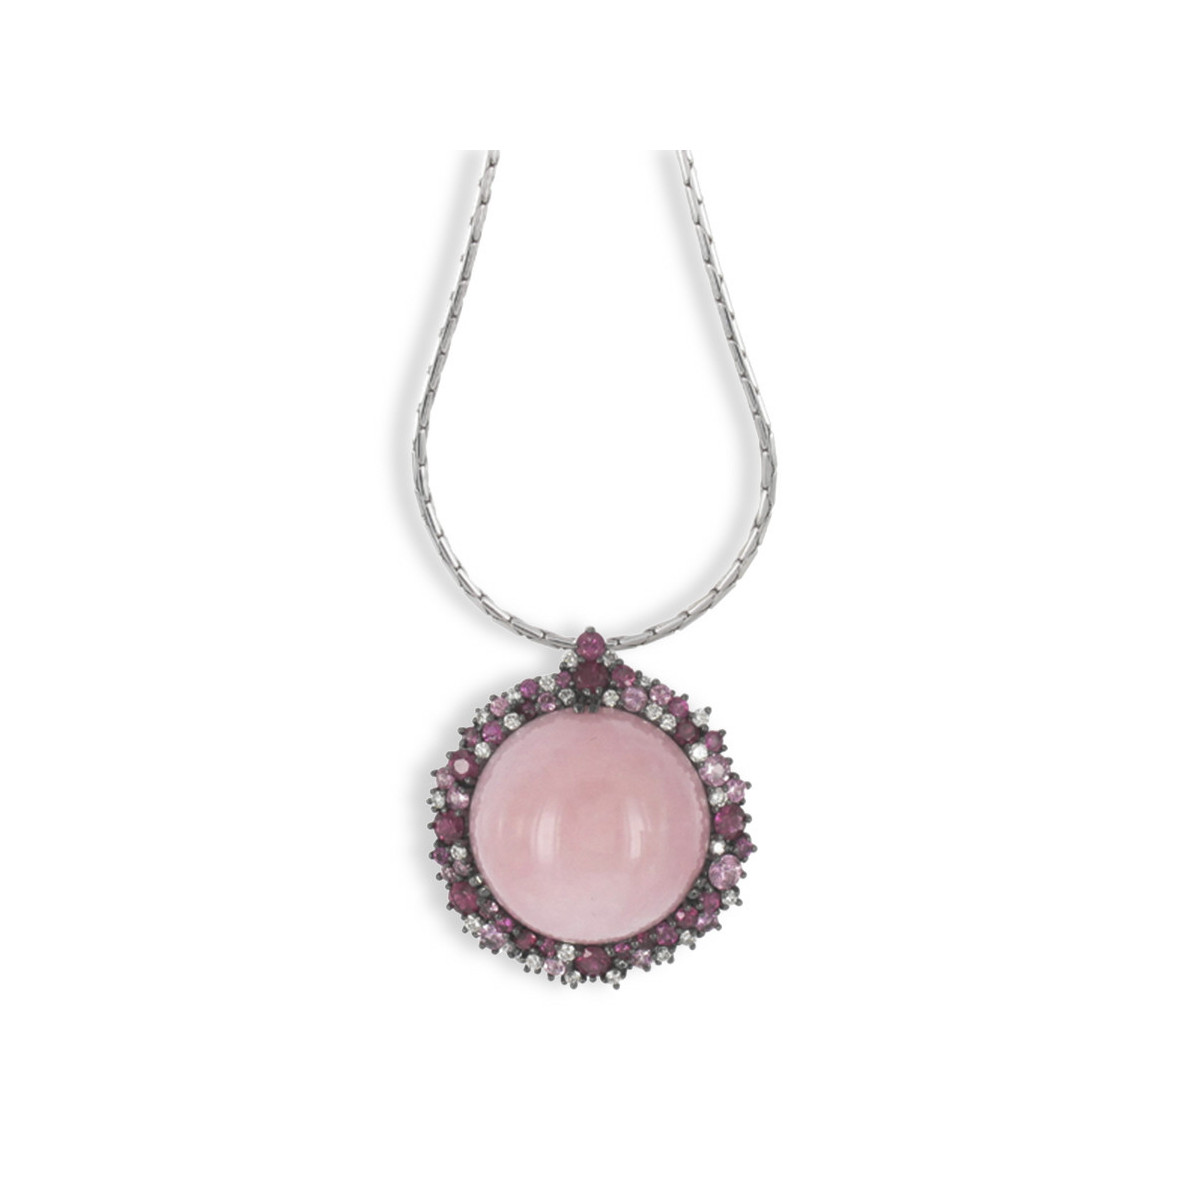 GOLD AND OPEL PINK PENDANT